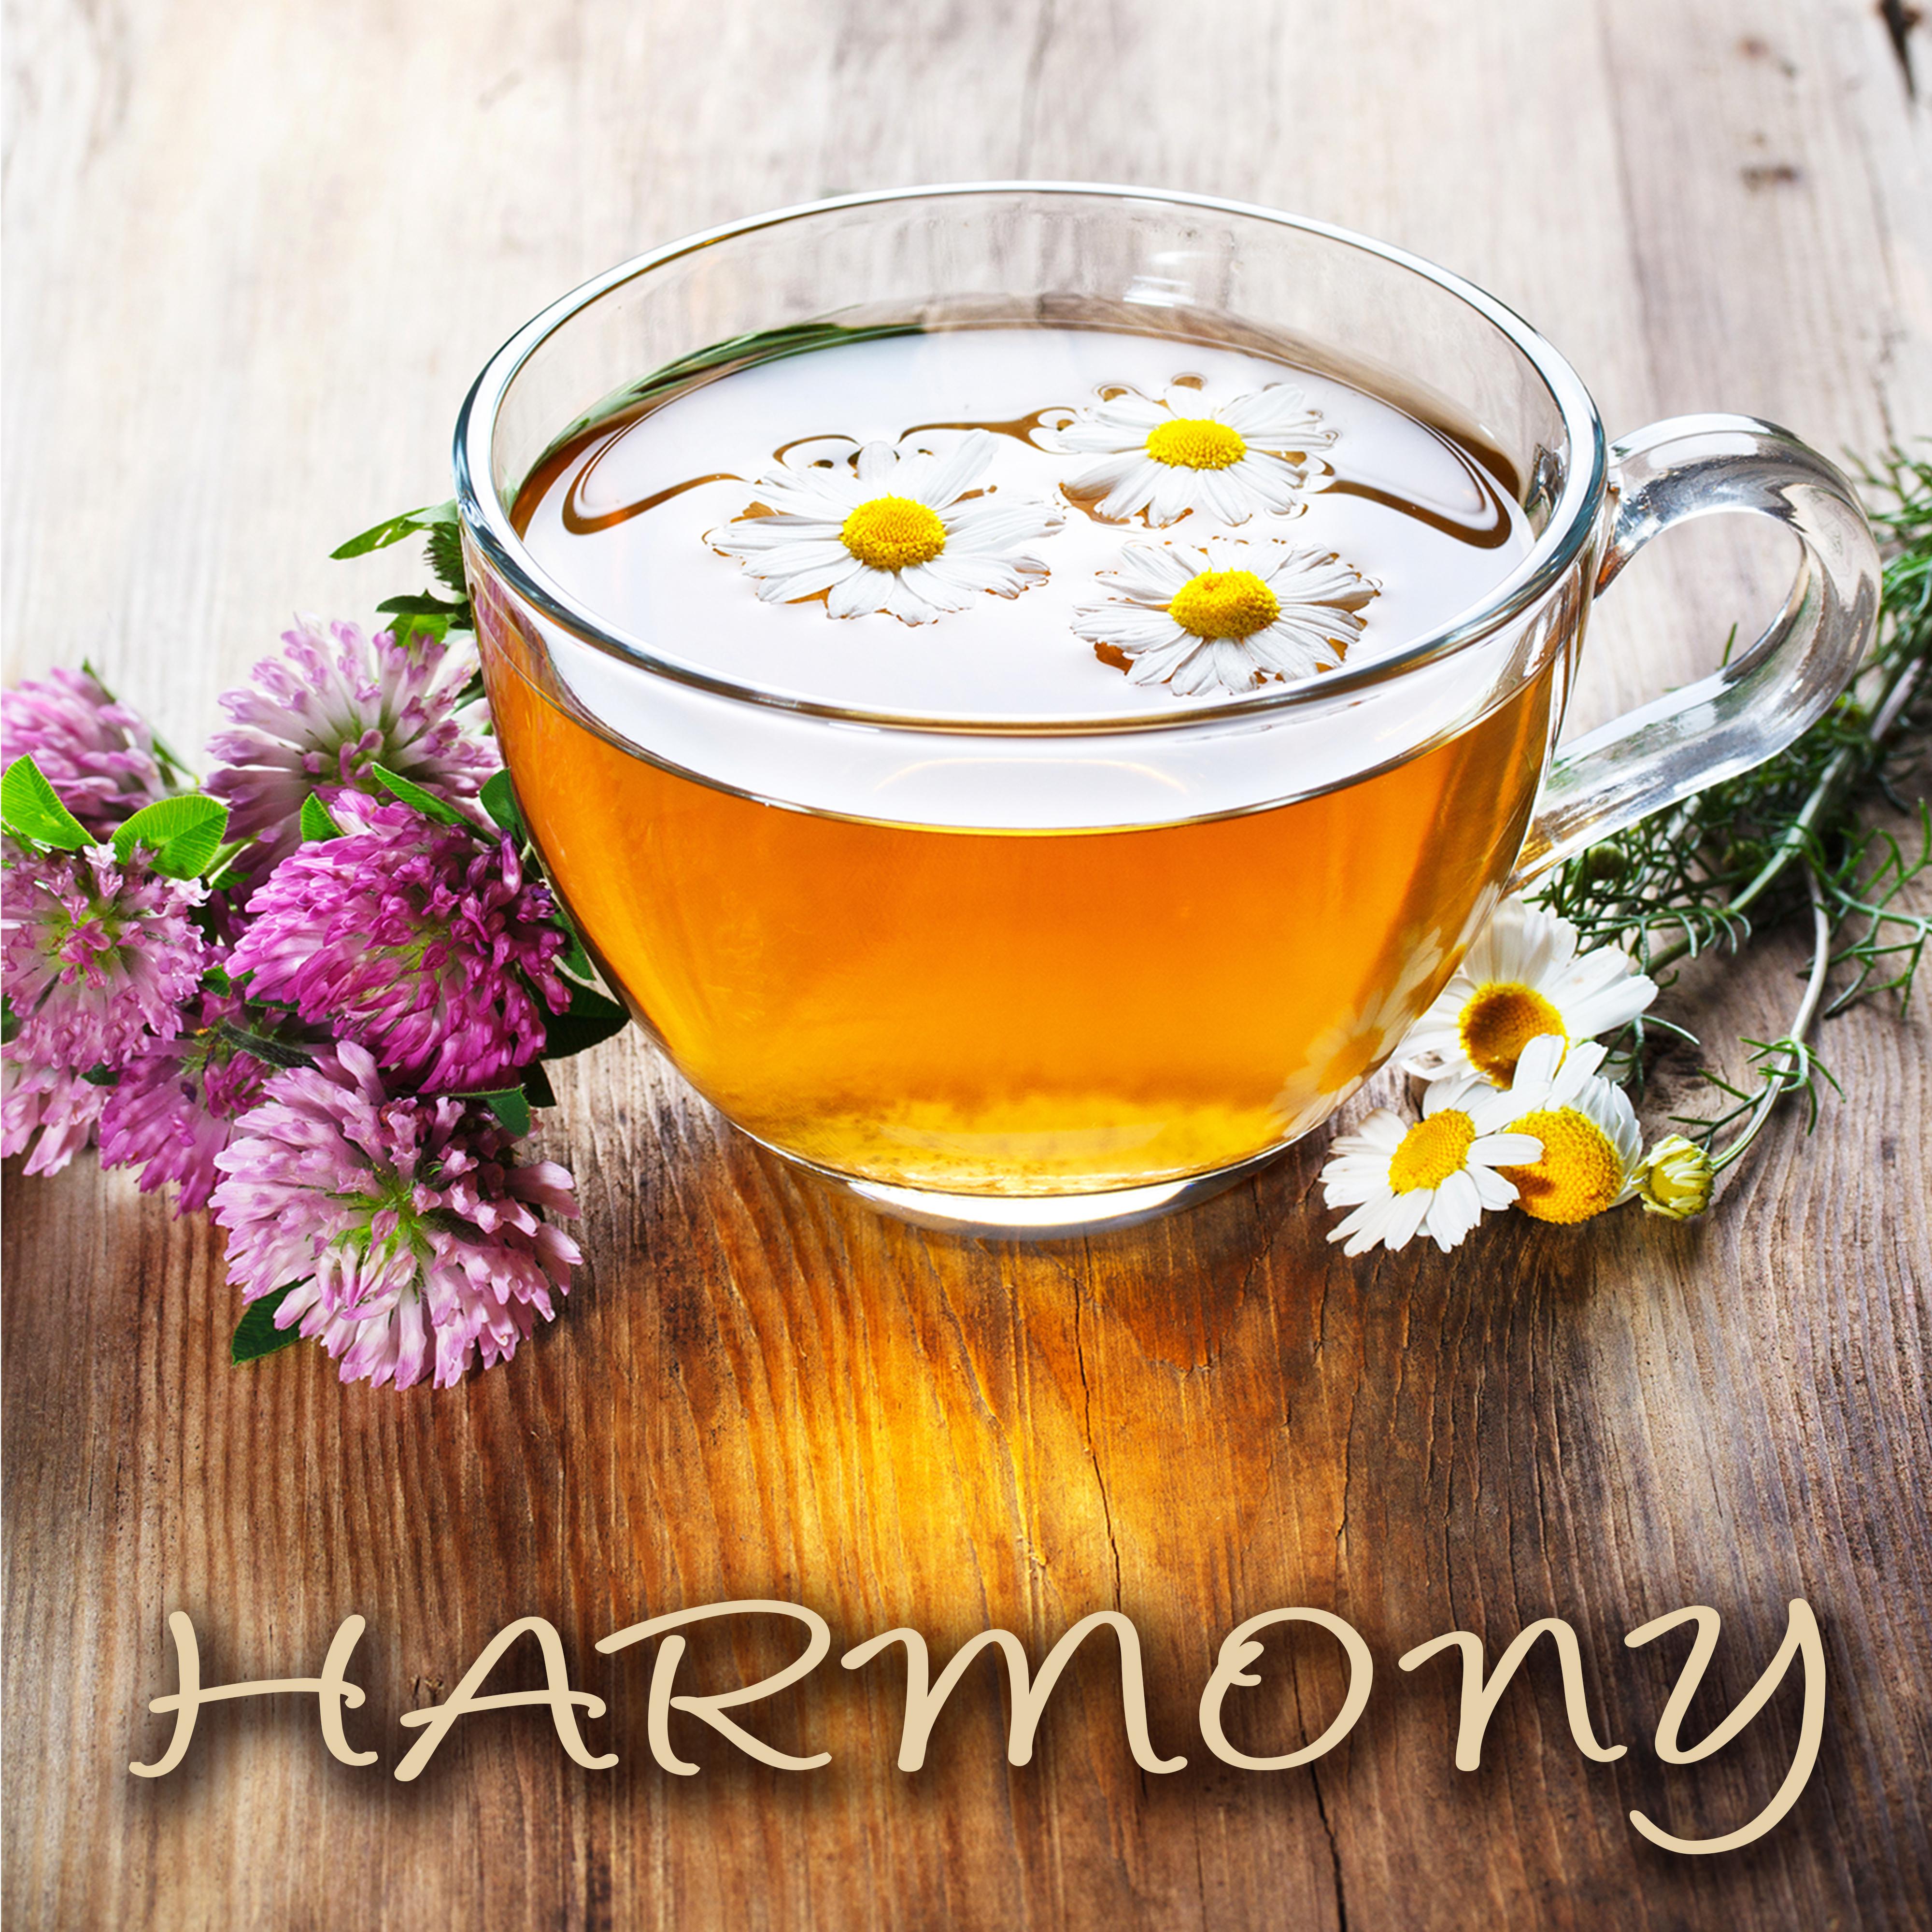 Harmony – Calming and Relaxing Songs for Mindfulness Meditation & Deeper Sleep